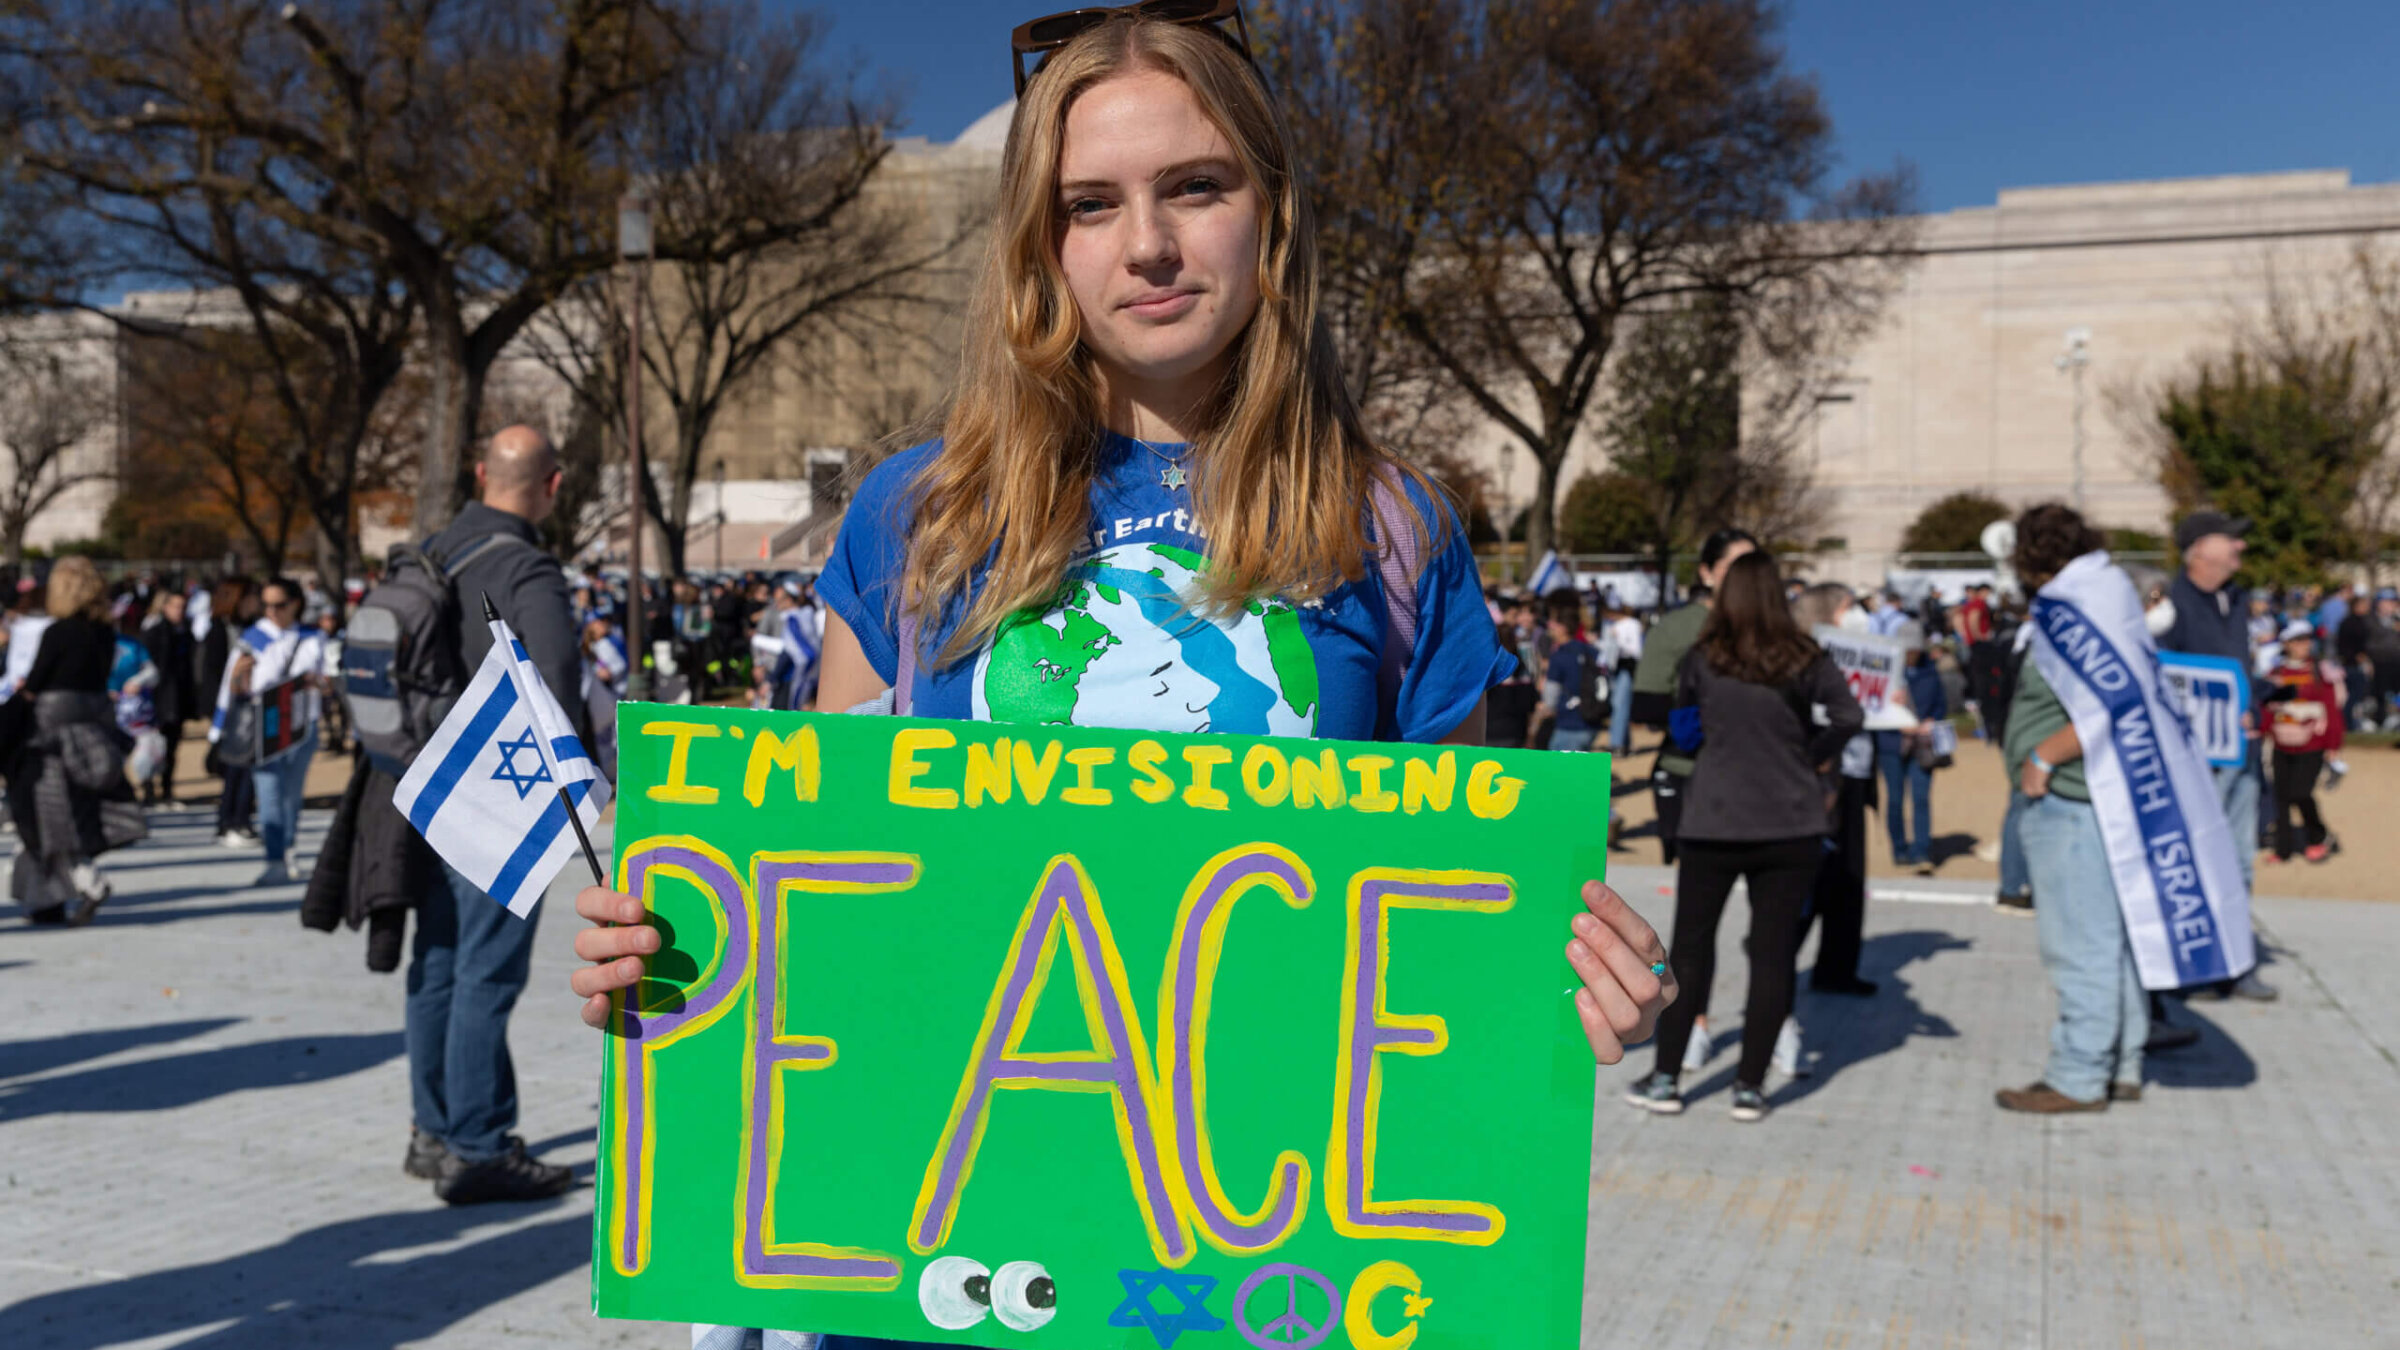 Sabrina Rubenstein, a recent Tulane University graduate, holds a sign at the March for Israel in Washington, D.C. on Nov. 14.